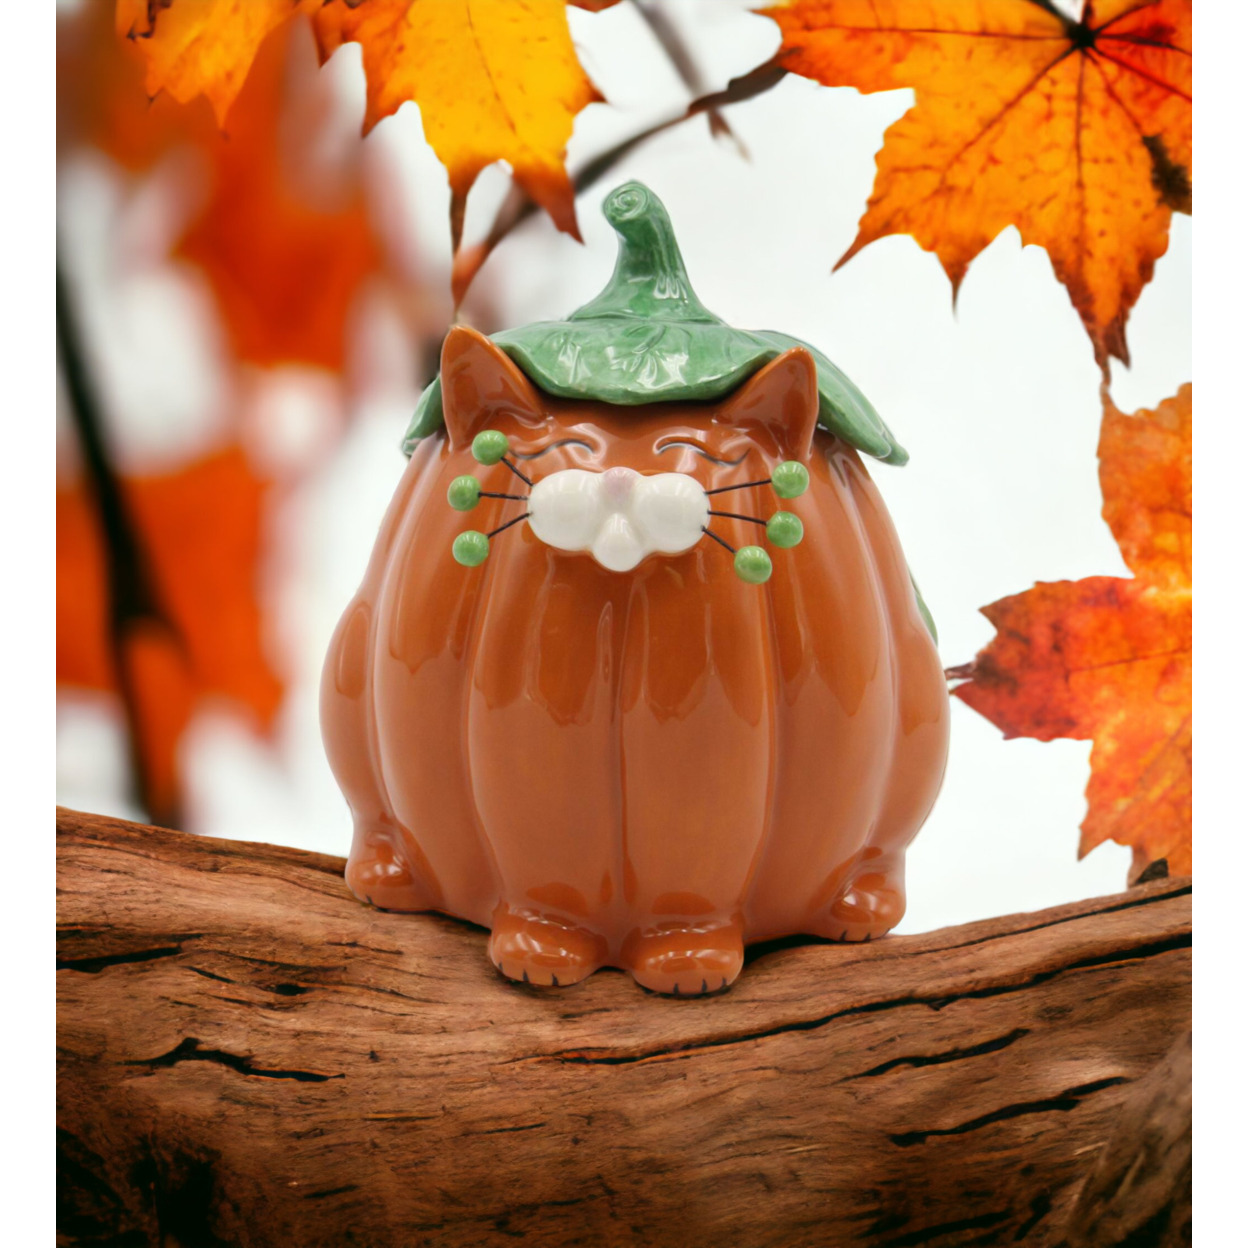 kevinsgiftshoppe Ceramic Halloween Decor Pumpkin Cat Candy Box, Home Décor, Gift for Her, Gift for Mom, Kitchen Décor, Fall Décor, Halloween